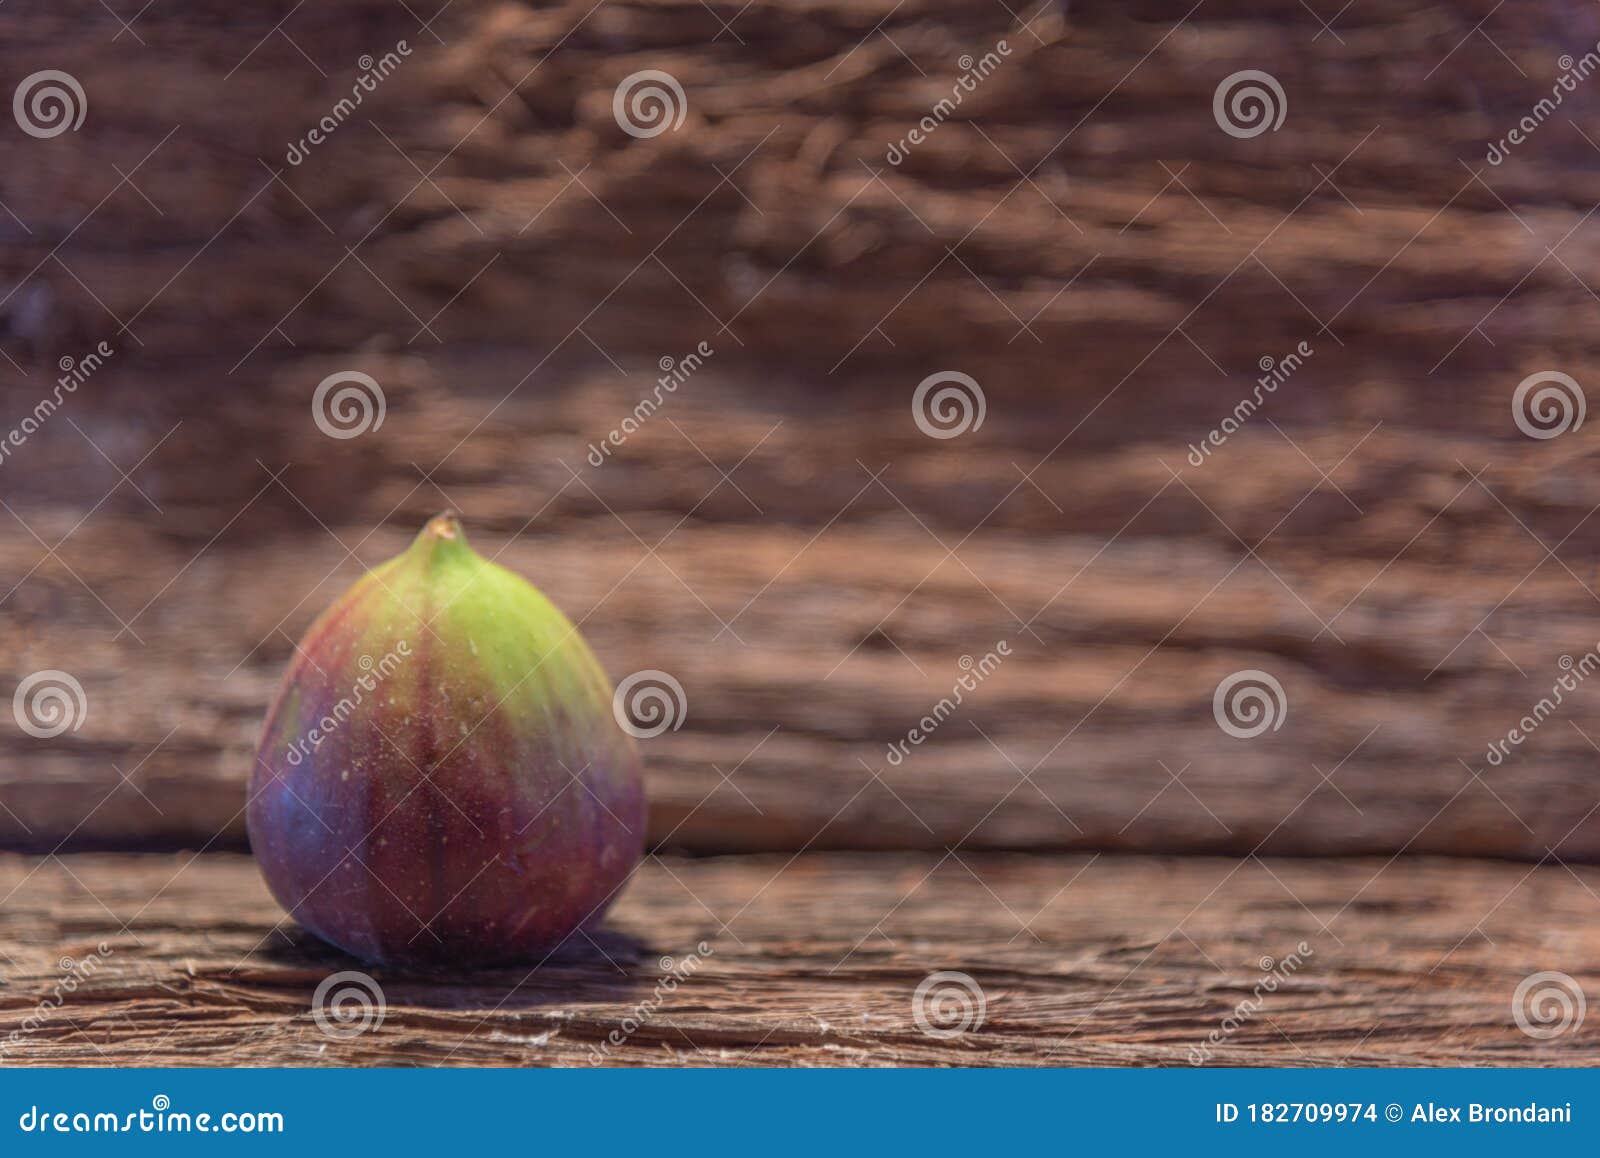 fresh fig fruits on aged wooden background